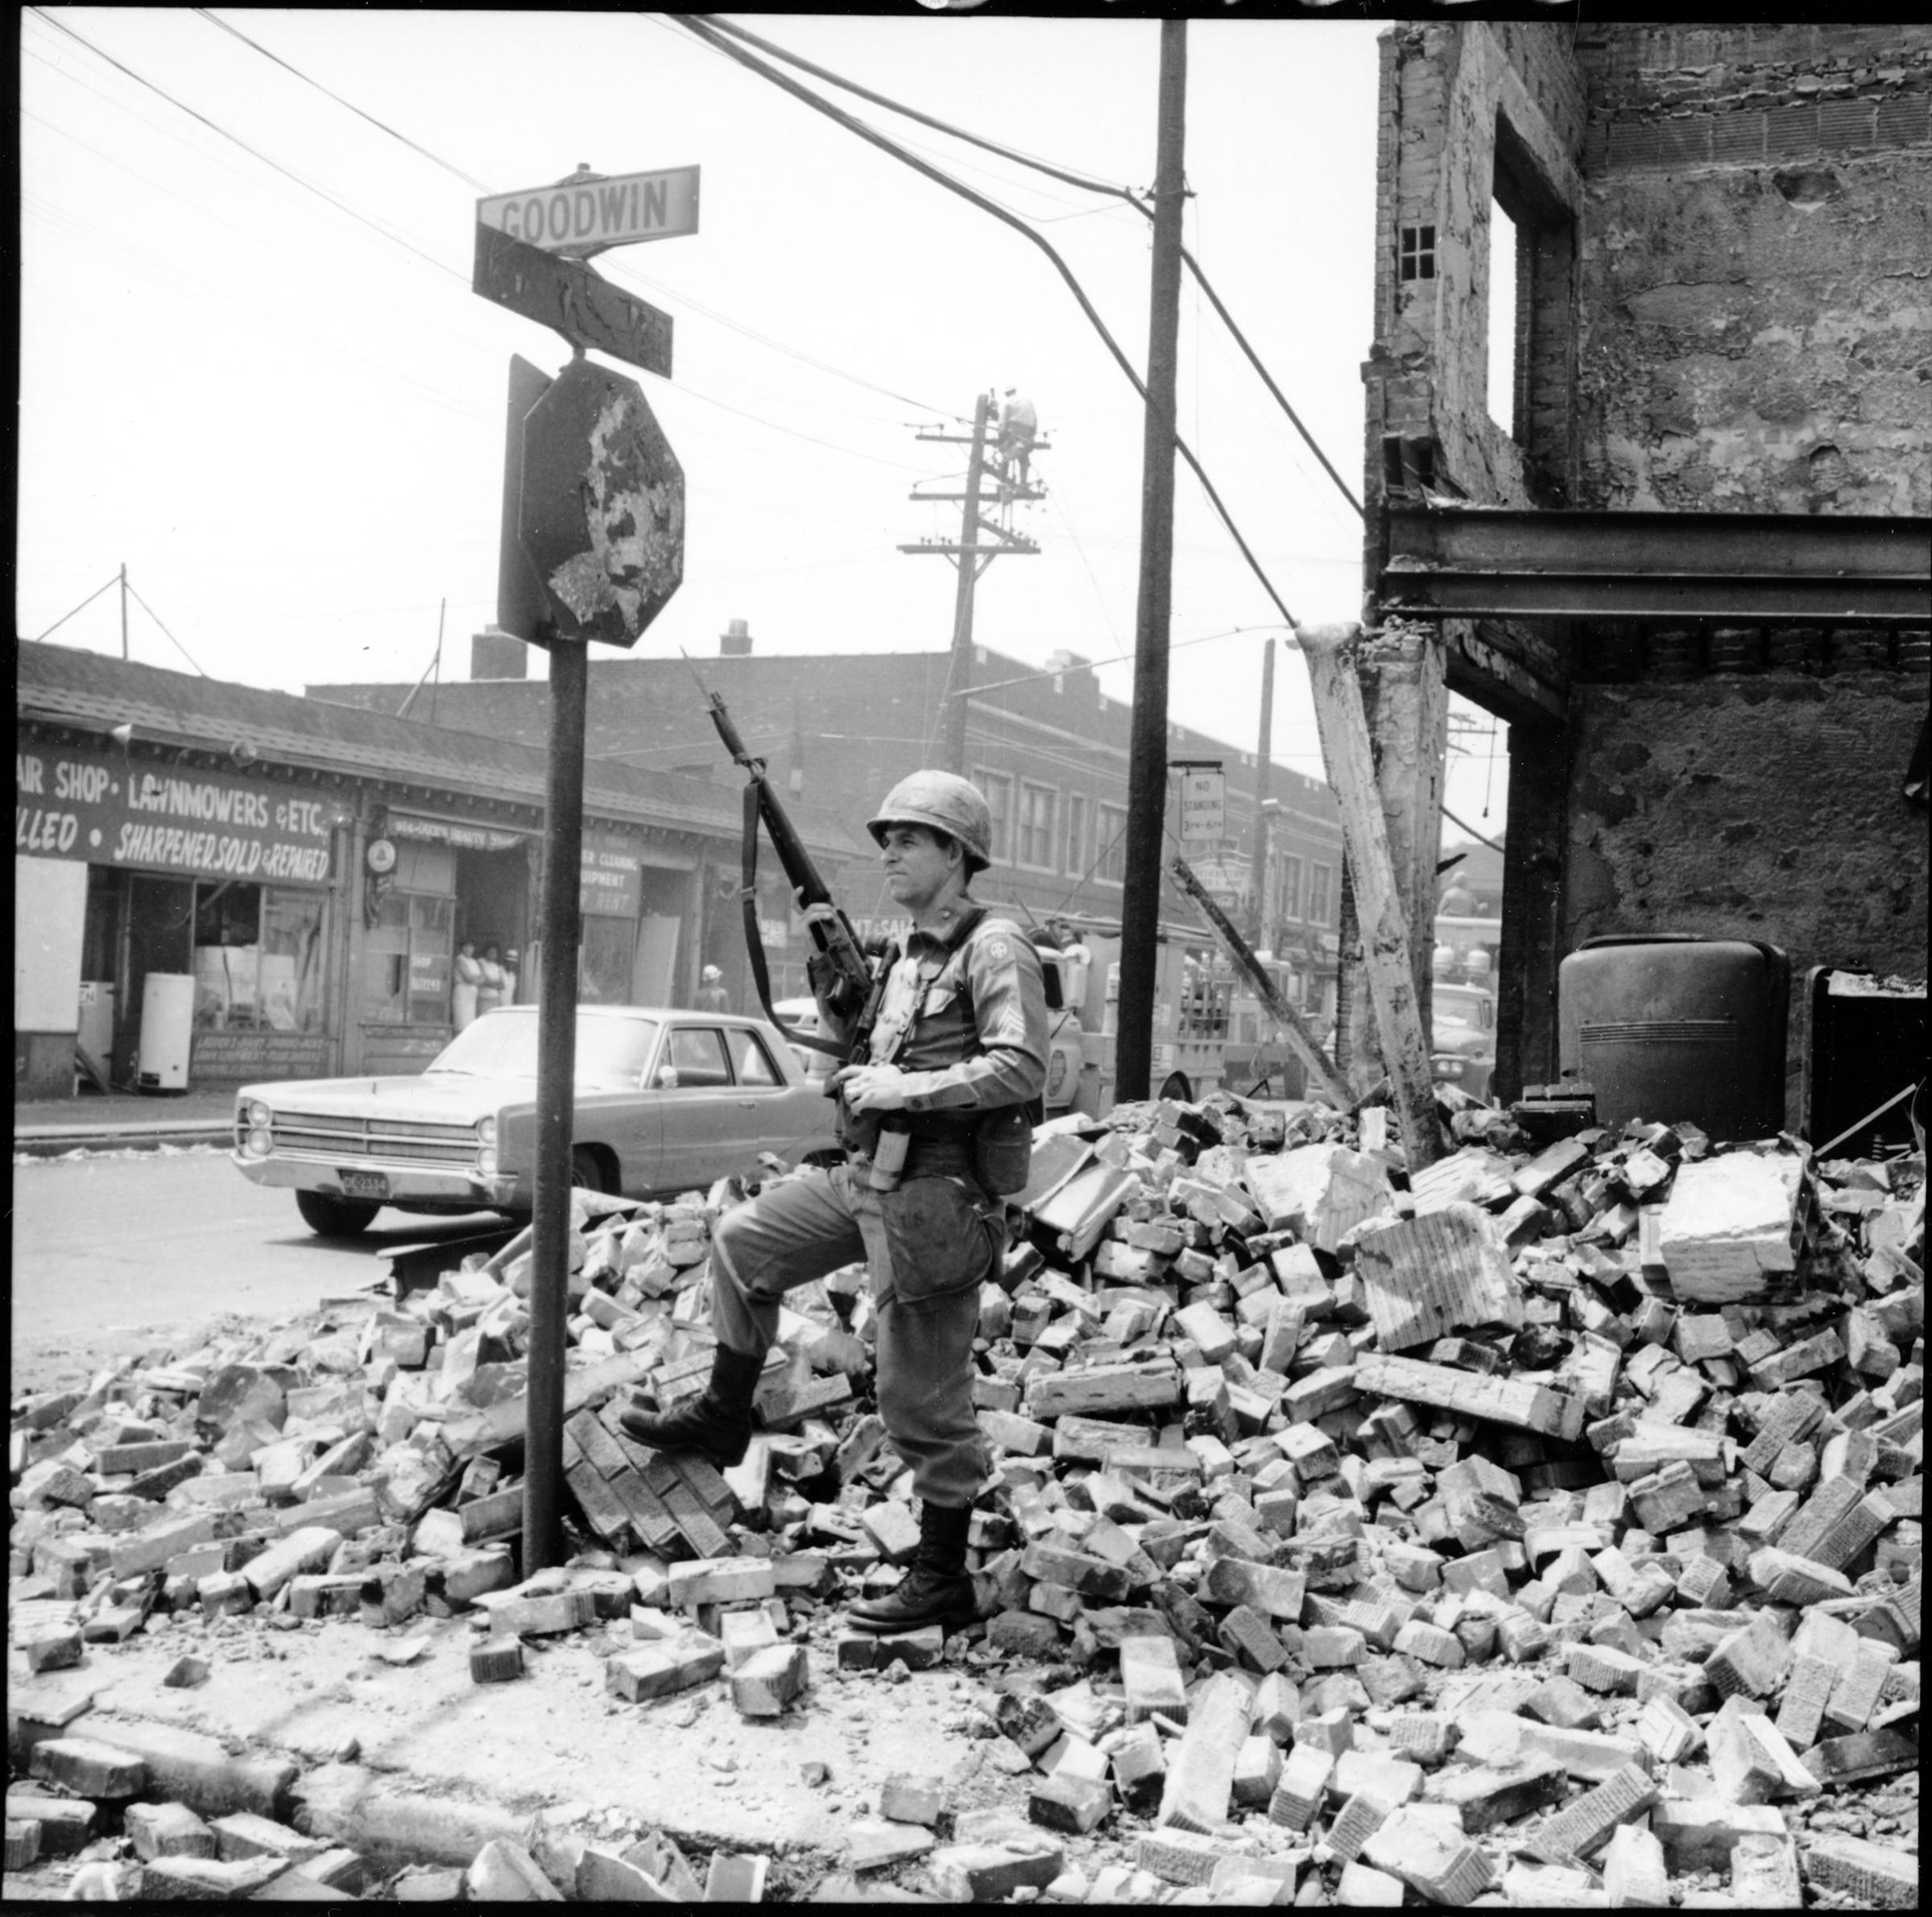 A Sargent from the U.S. Airborne Division stands guard at the corner of Westminster and Goodwin Streets in Detroit during the violence and chaos that took place in July ’67.